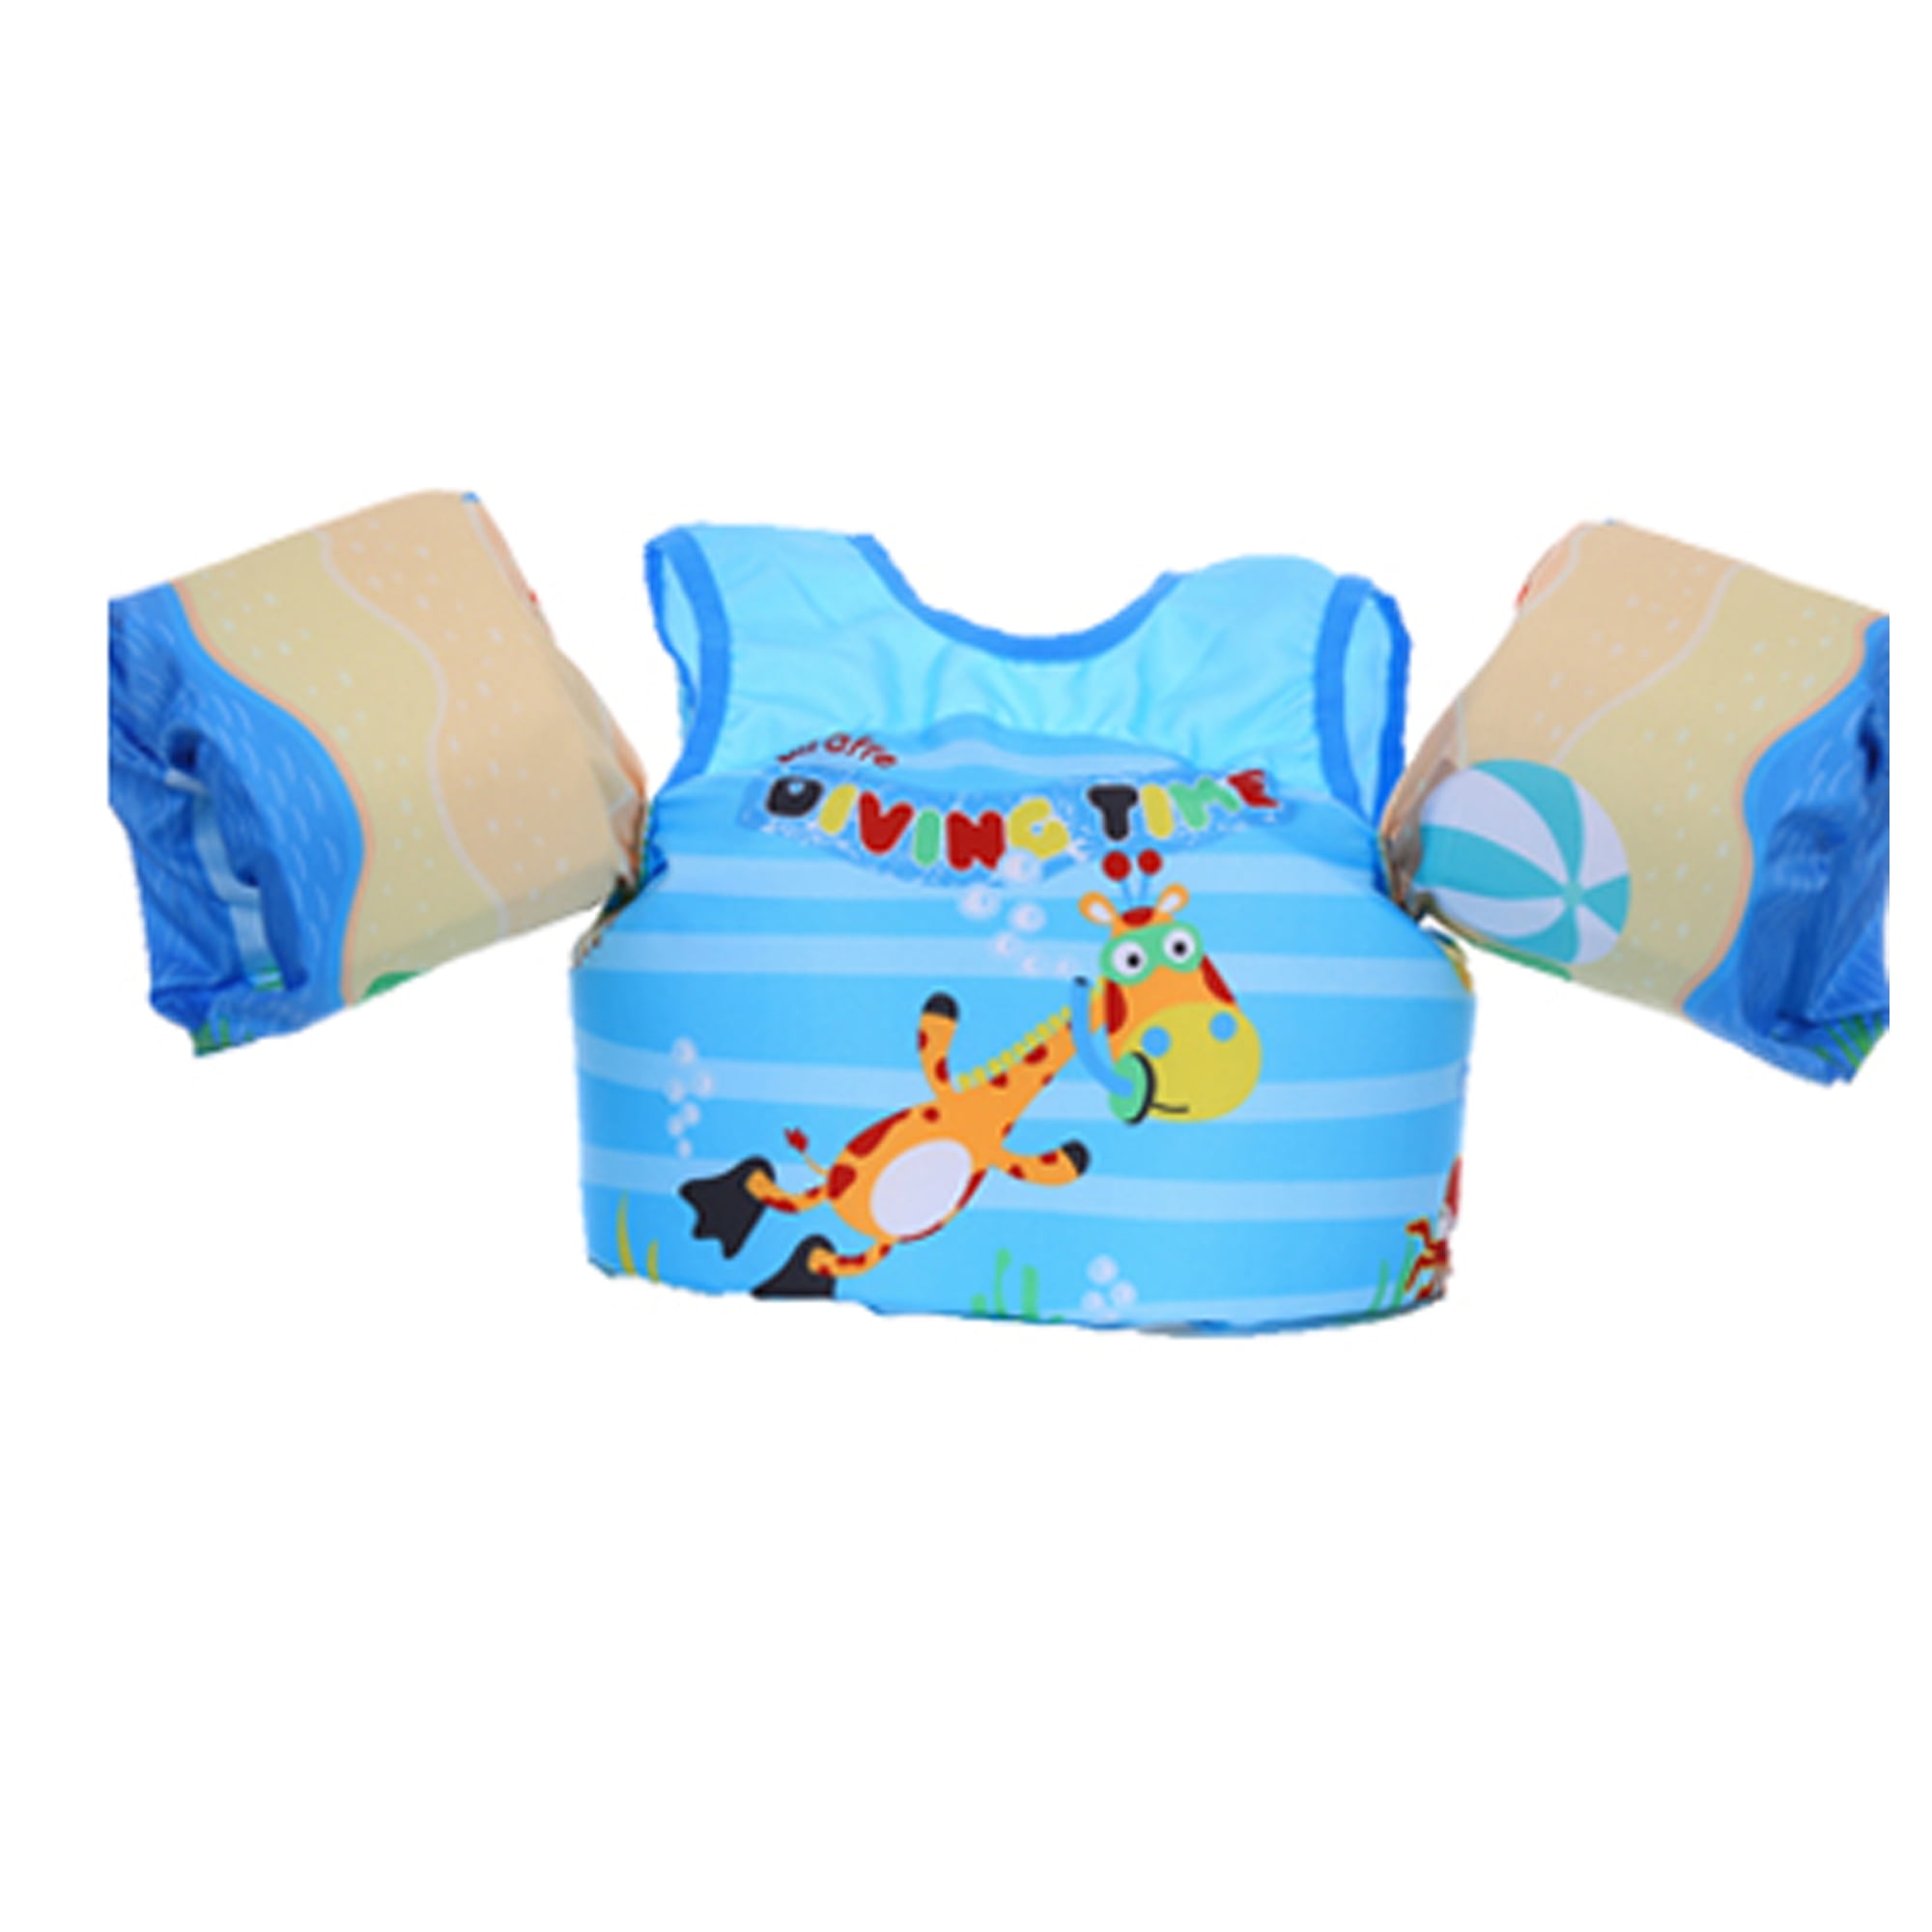 Puddle Jumper Swimming Deluxe Cartoon Life Jacket safety Vest for Kids Baby US 